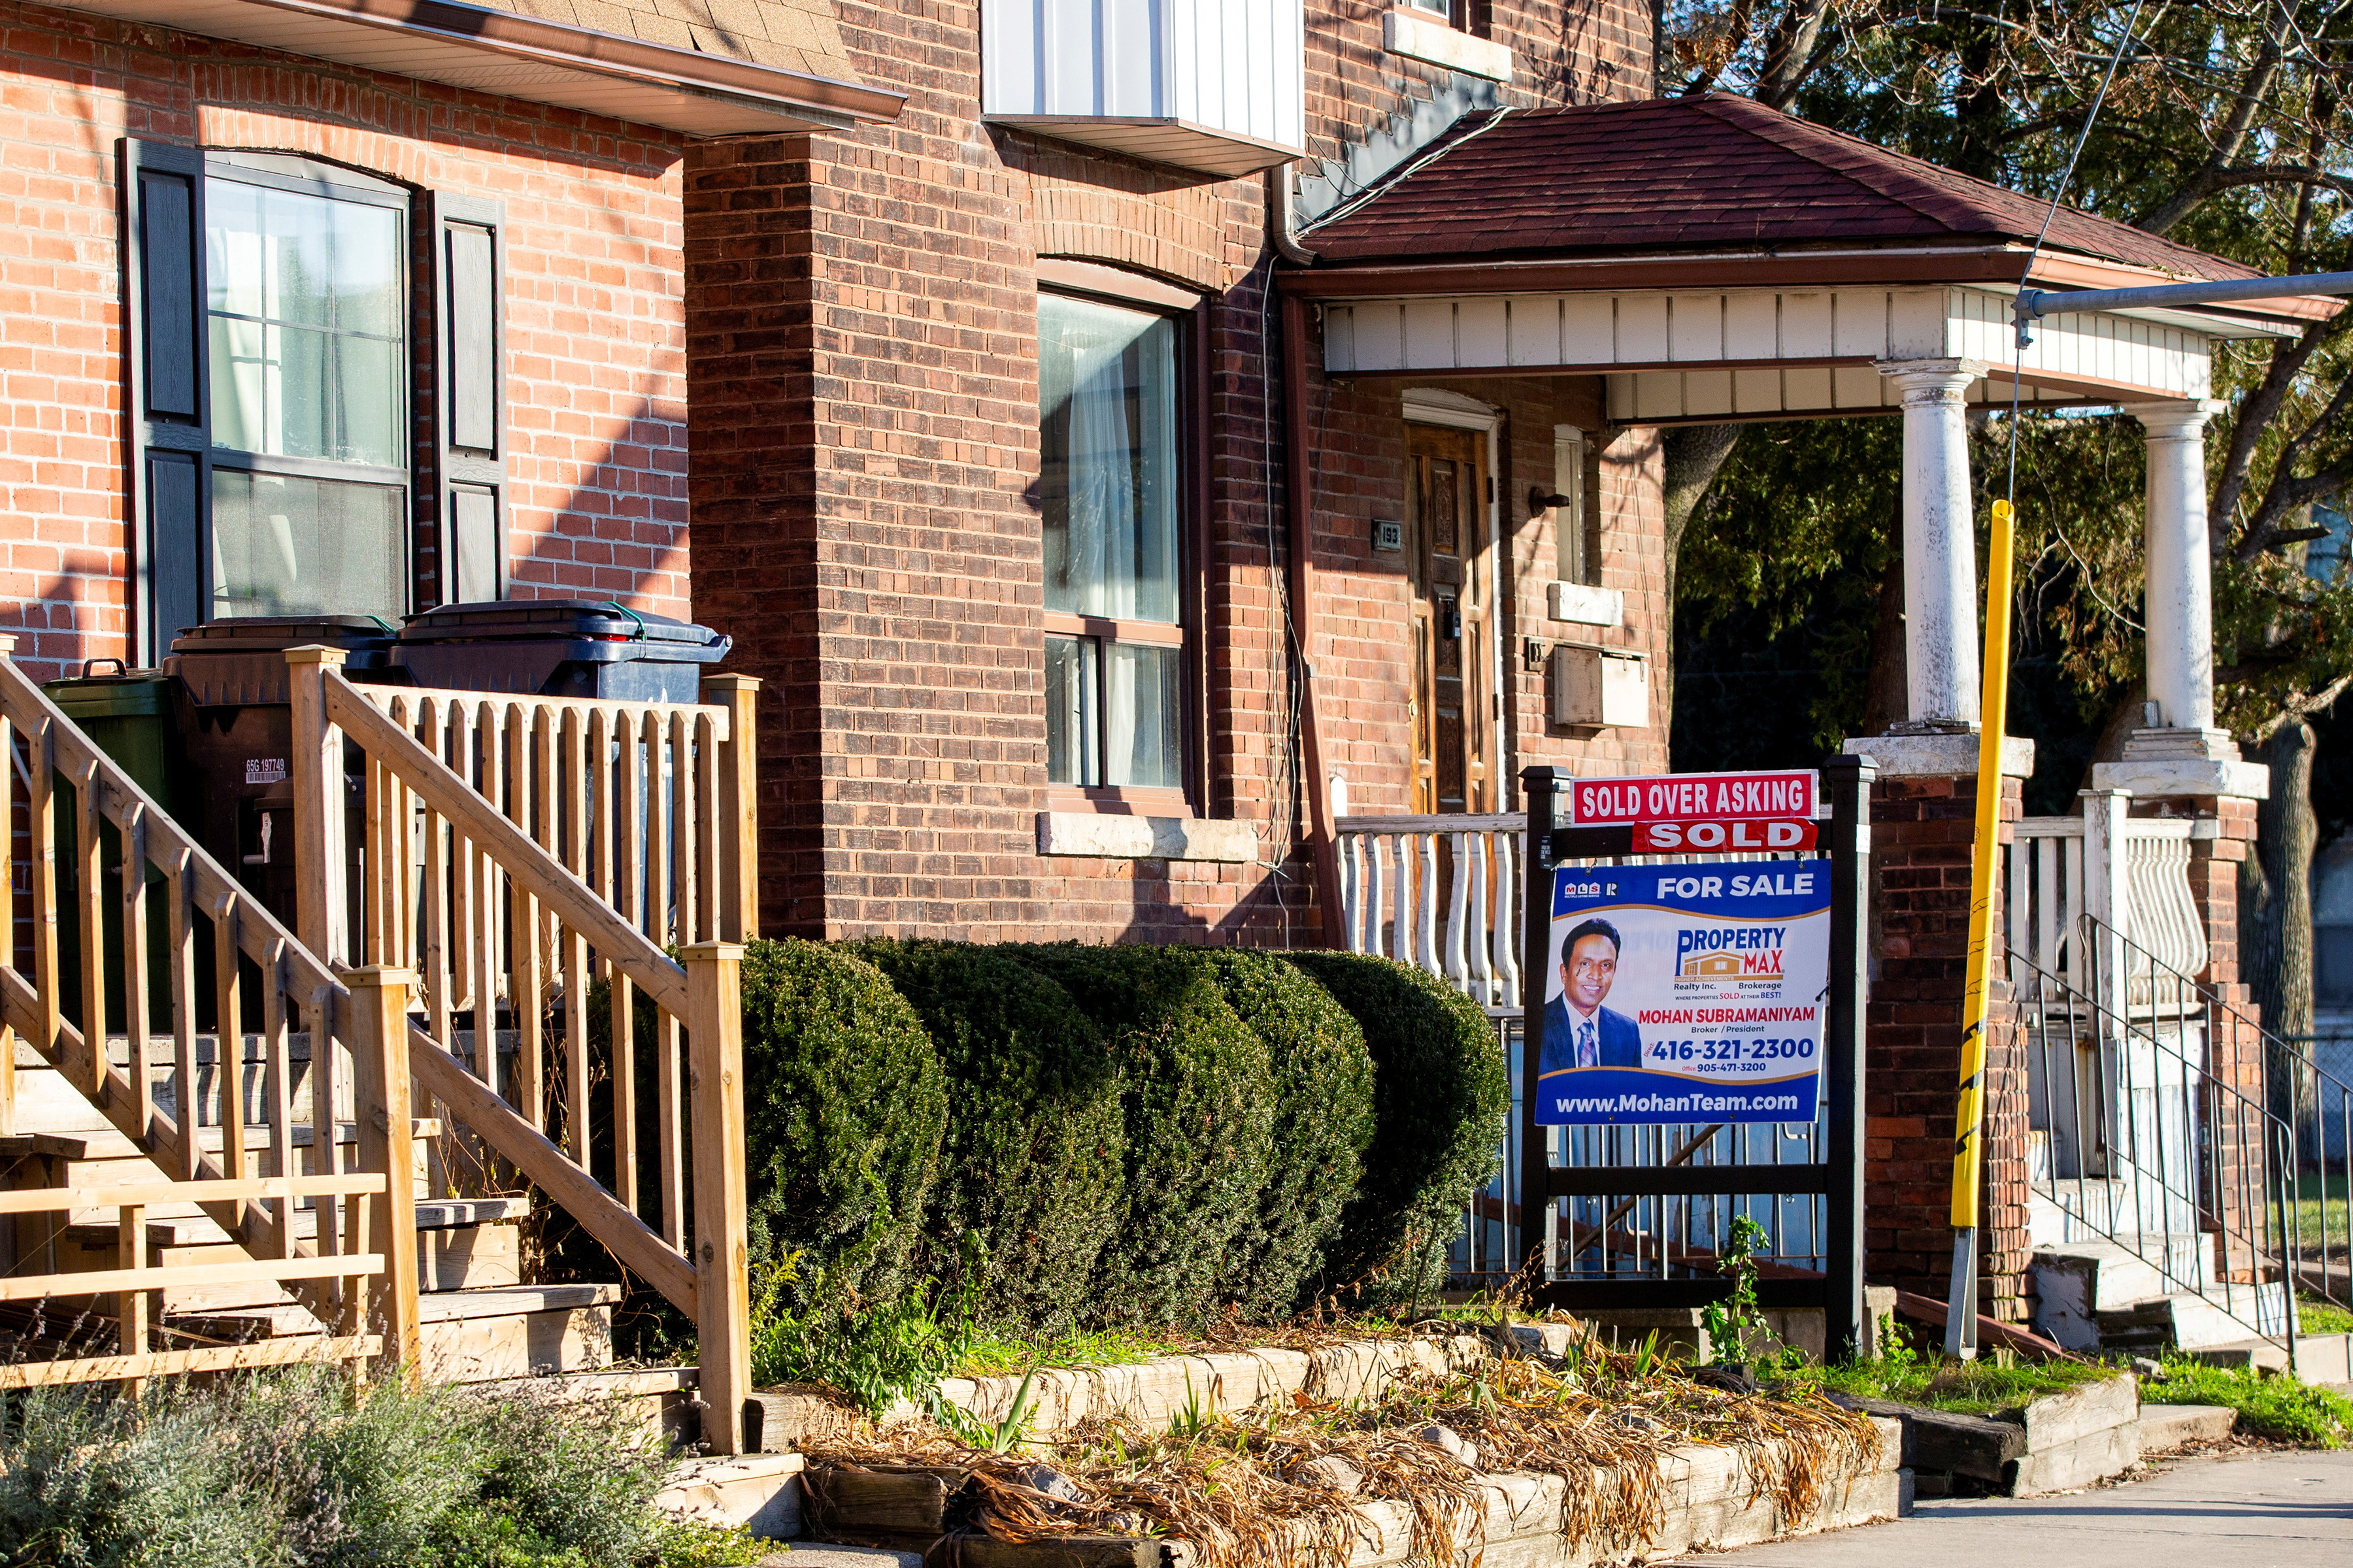 Real estate signs in Toronto